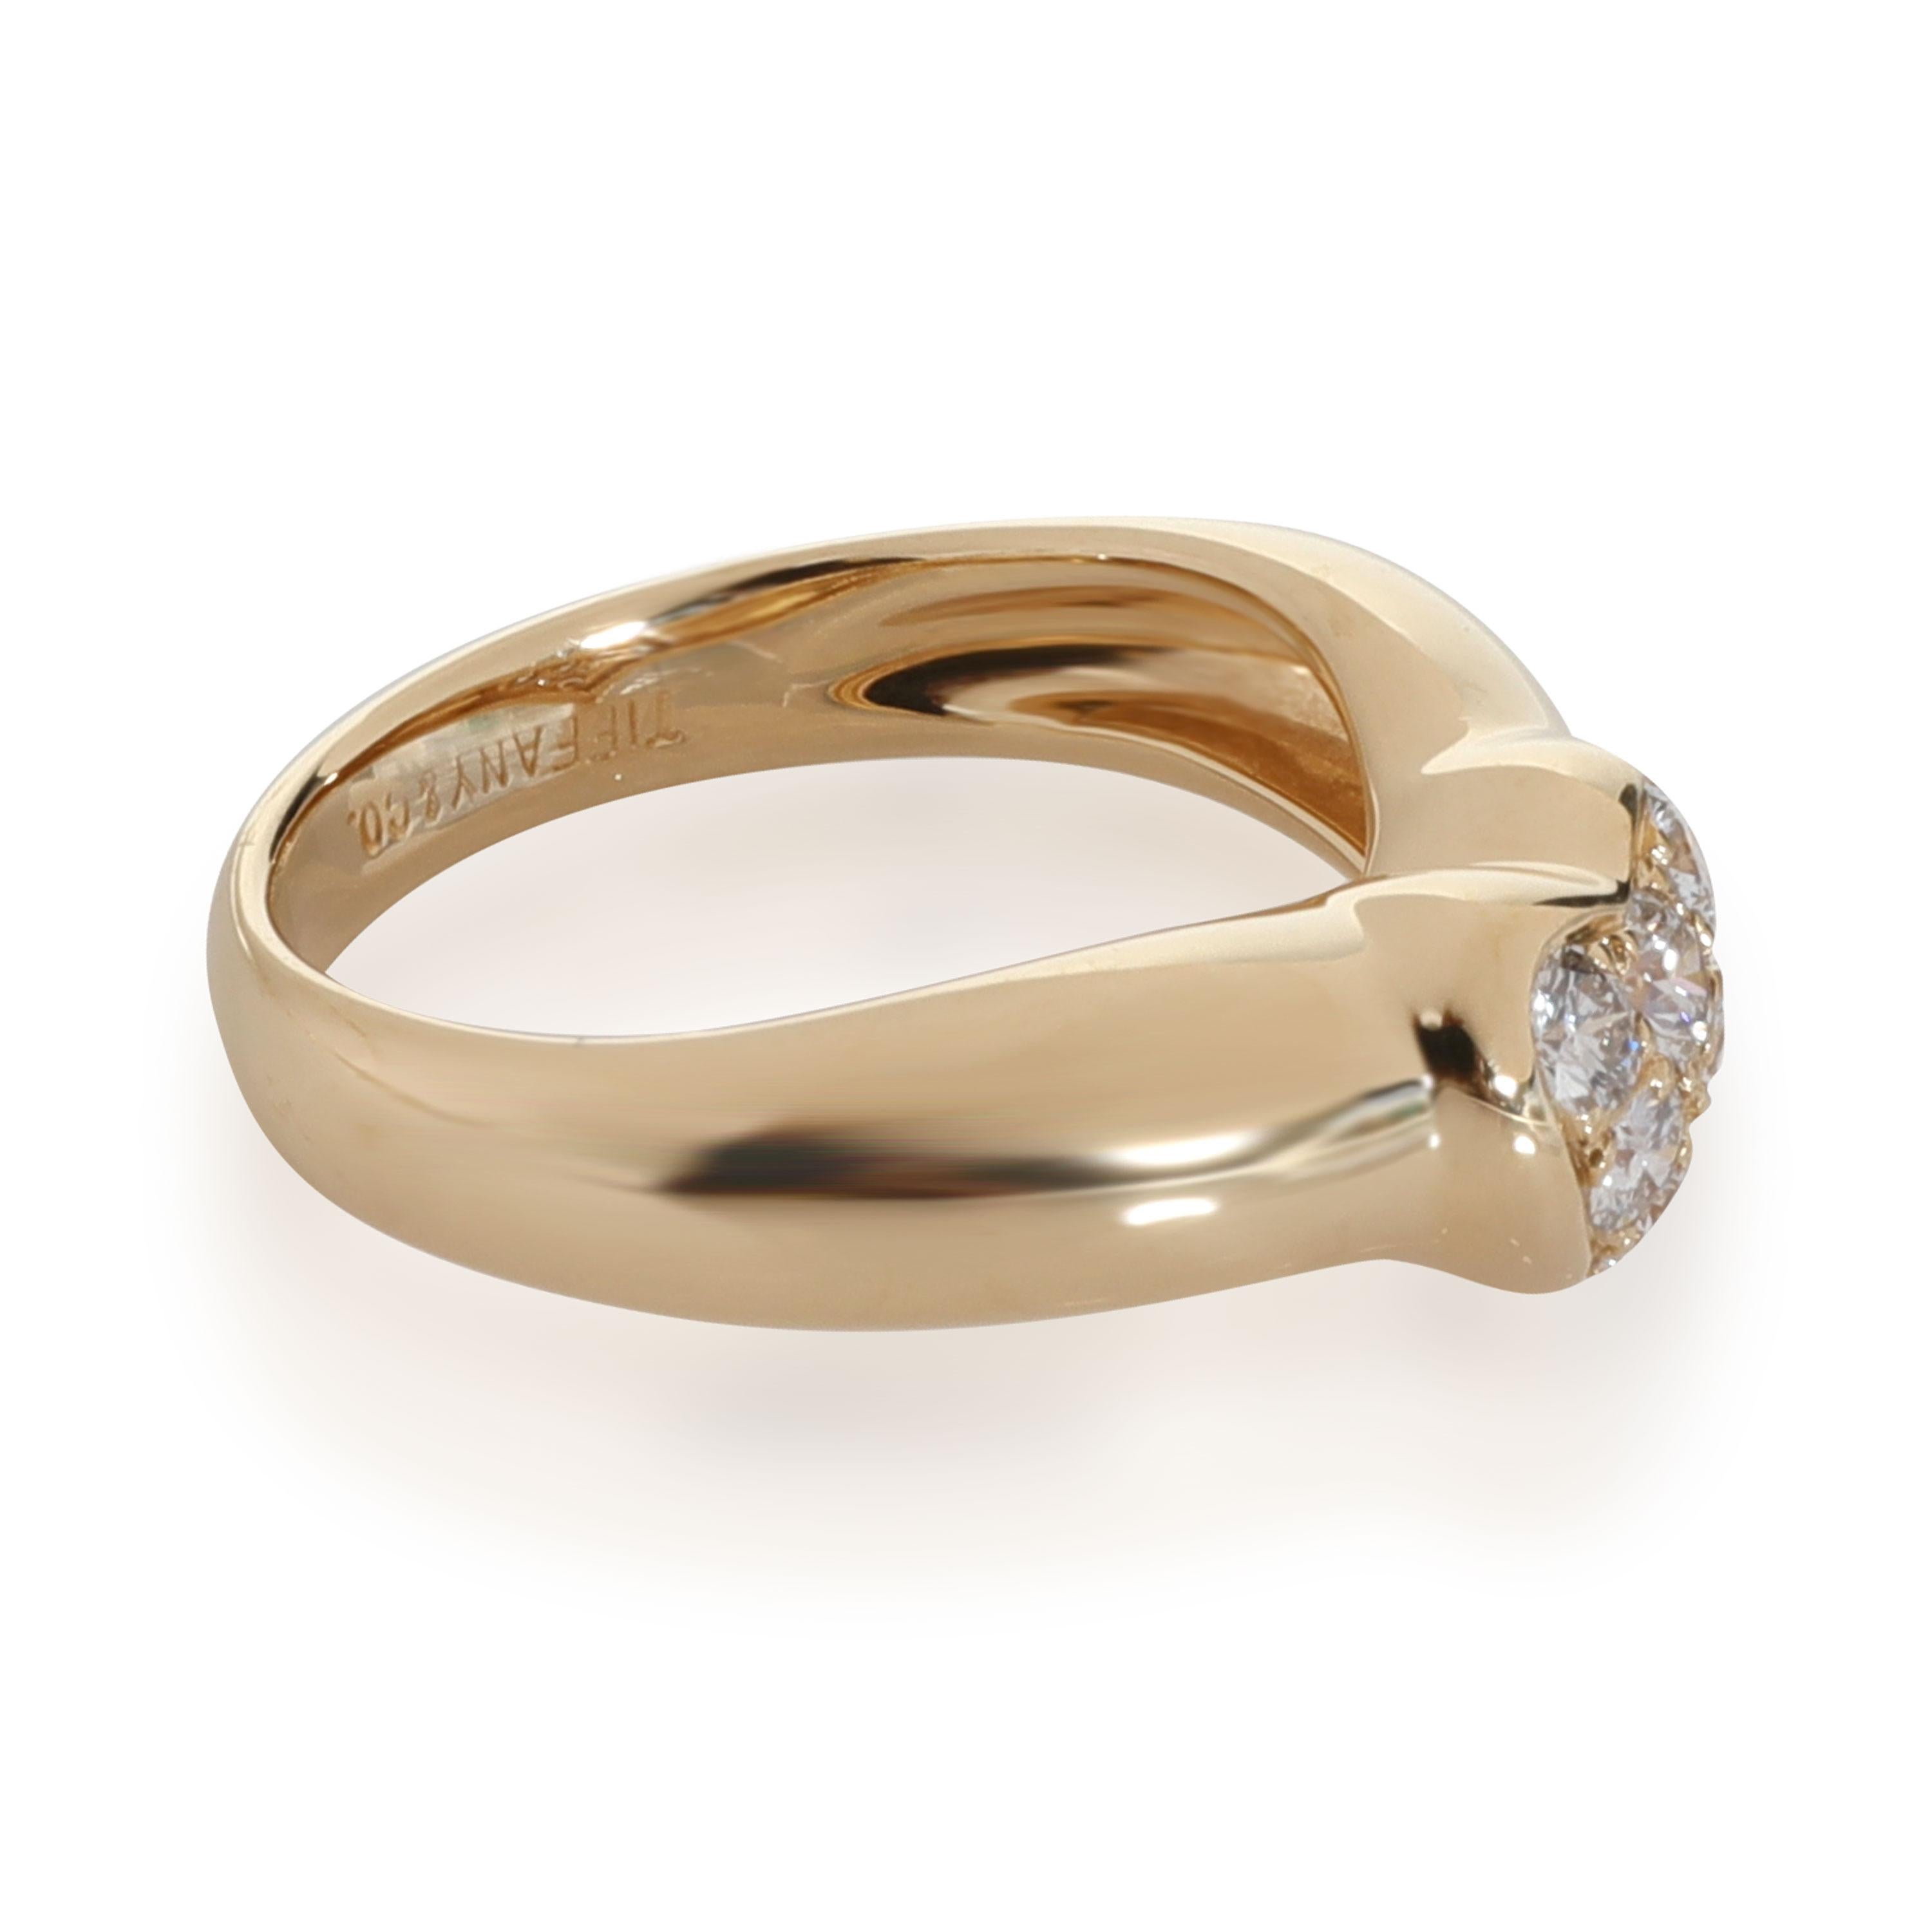 Tiffany & Co. Diamond Heart Ring in 18K Yellow Gold 0.25 CTW

PRIMARY DETAILS
SKU: 112142
Listing Title: Tiffany & Co. Diamond Heart Ring in 18K Yellow Gold 0.25 CTW
Condition Description: Retails for 2,100 USD. In excellent condition and recently